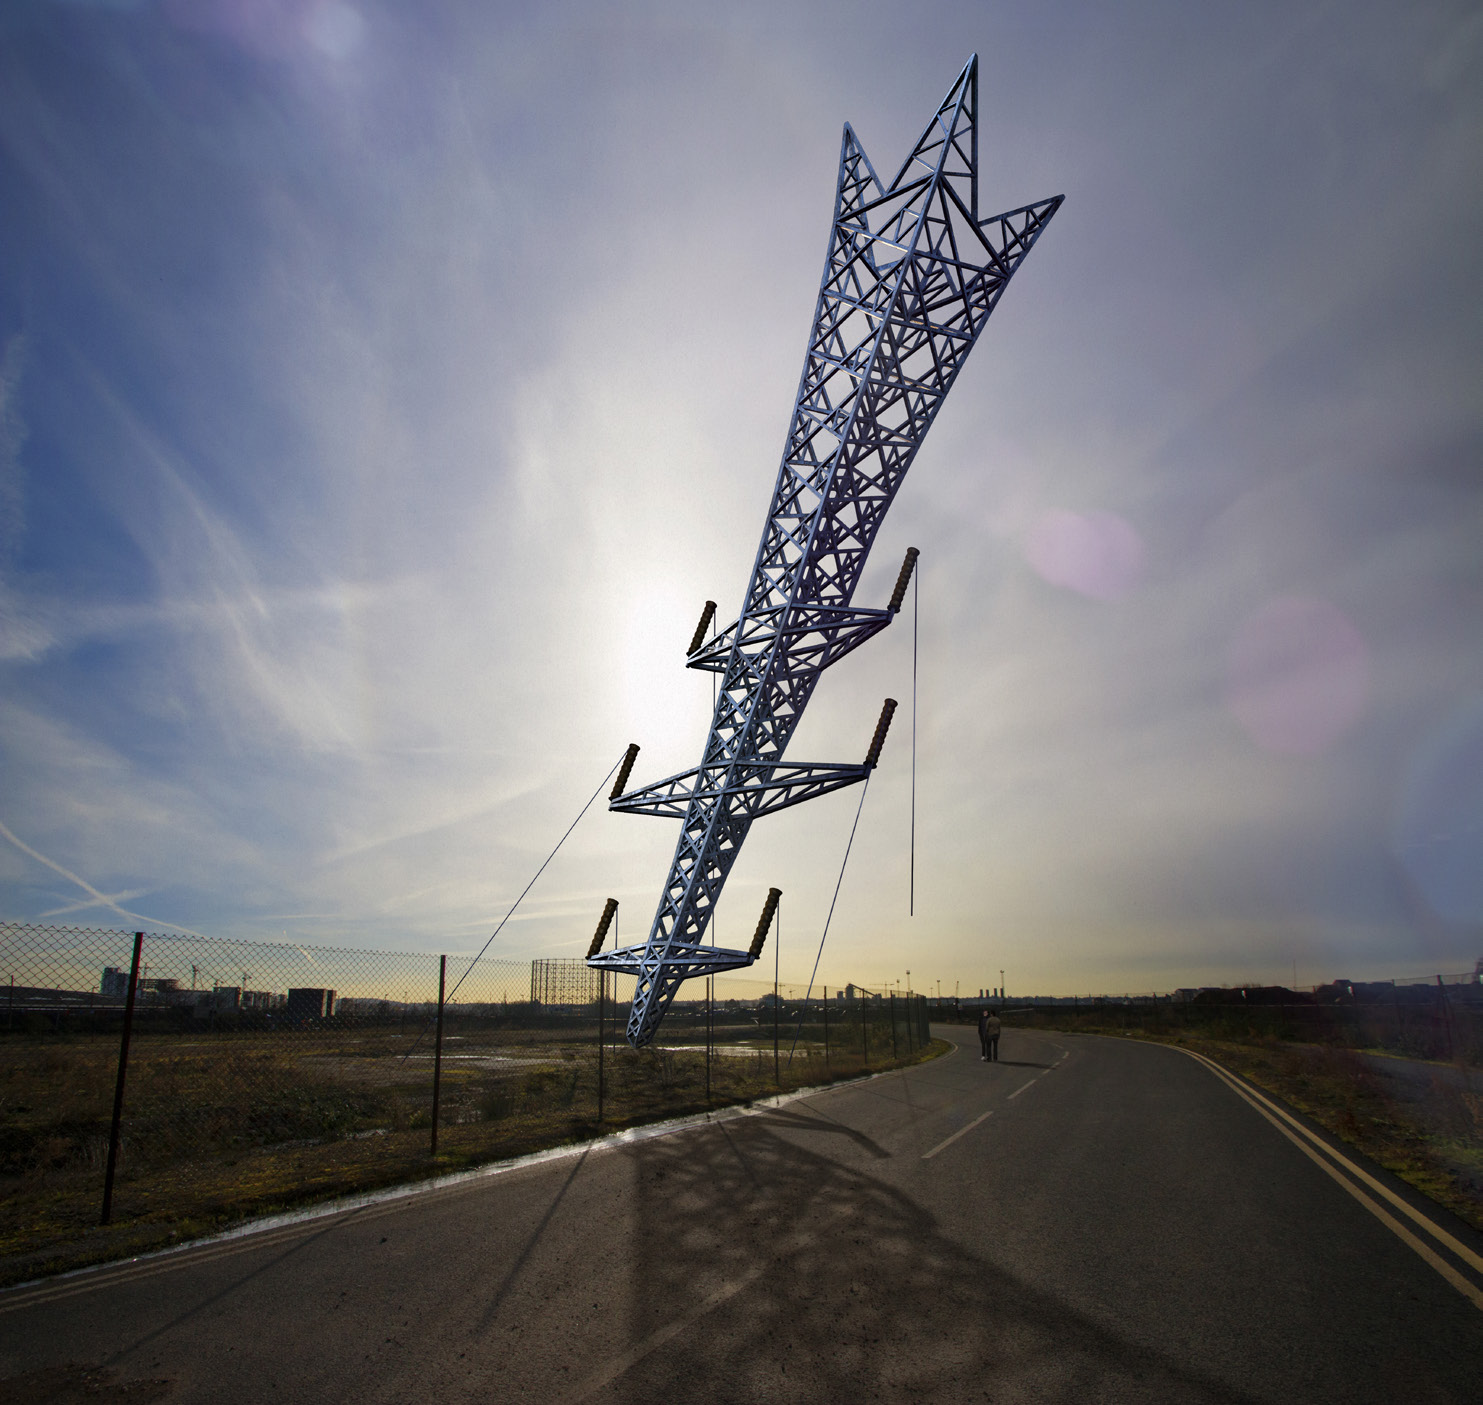 This Insane Transmission Tower Sculpture Remind Us Of Our Mortality